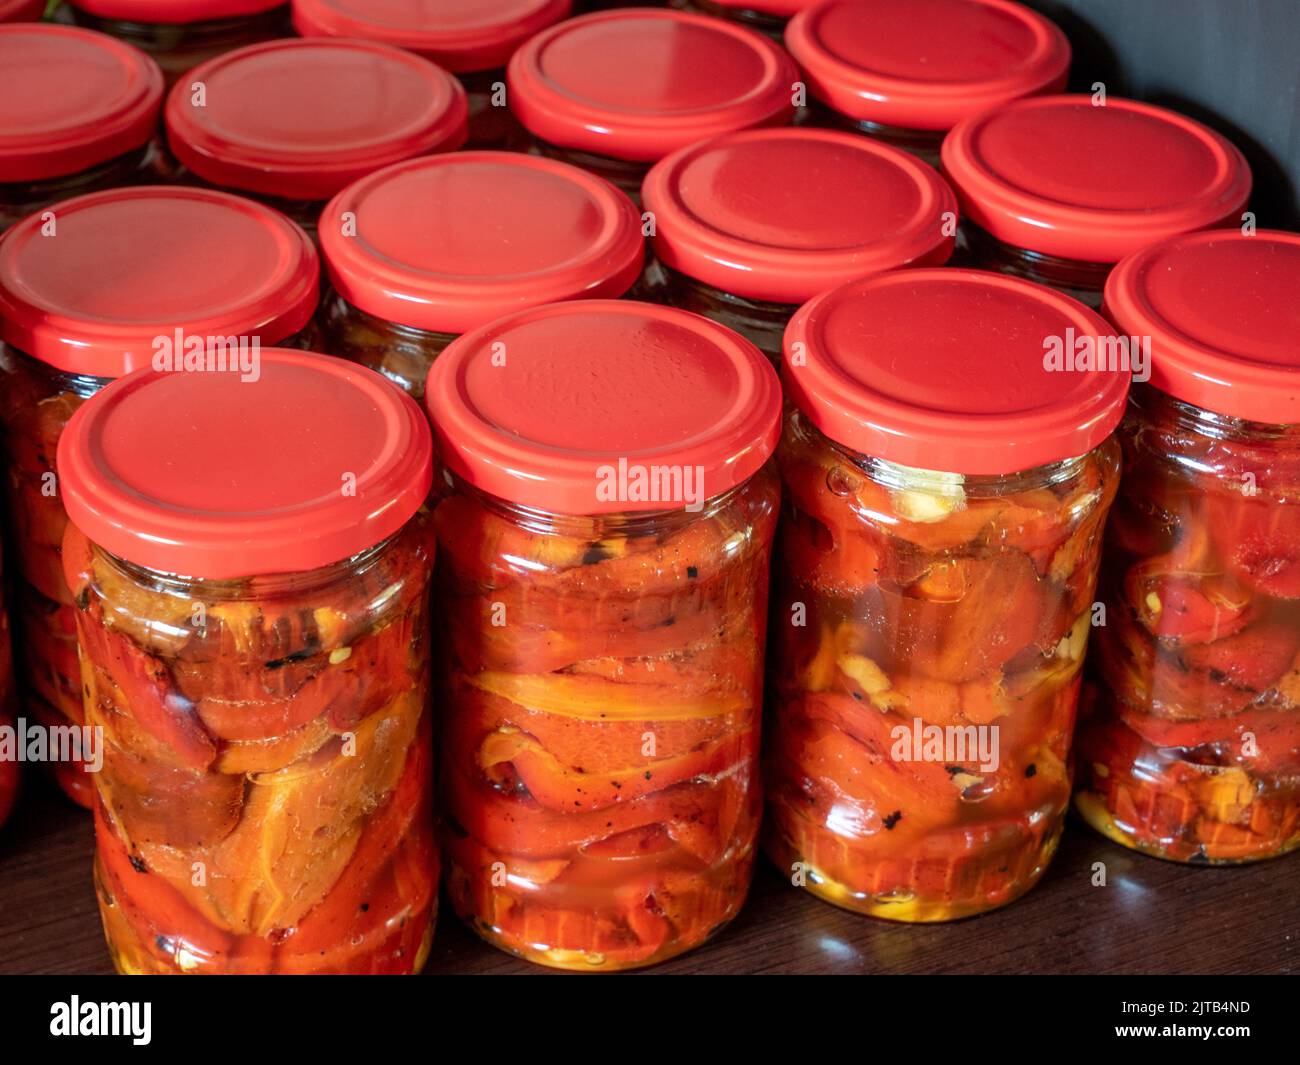 jars with preserved peppers Stock Photo